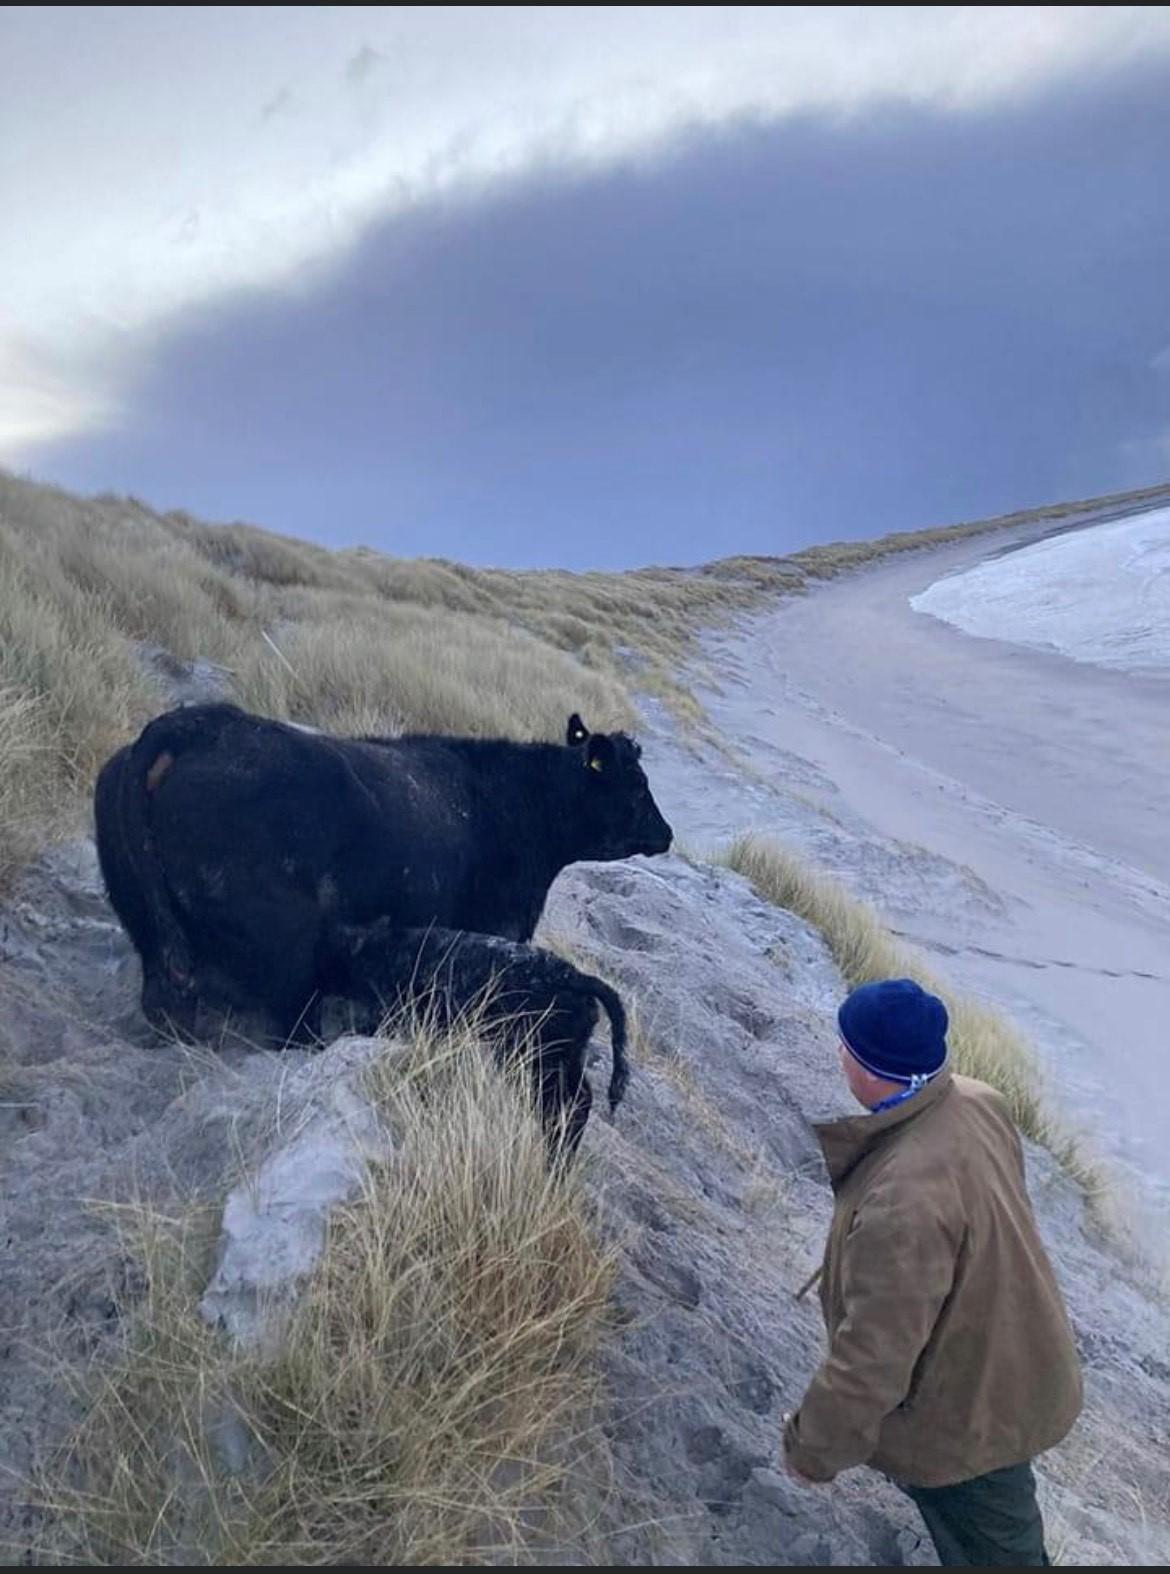 Bethan MacLellan (Isle of Uist) - 'Can be challenging when cows decide to calve in the sand dunes.' 